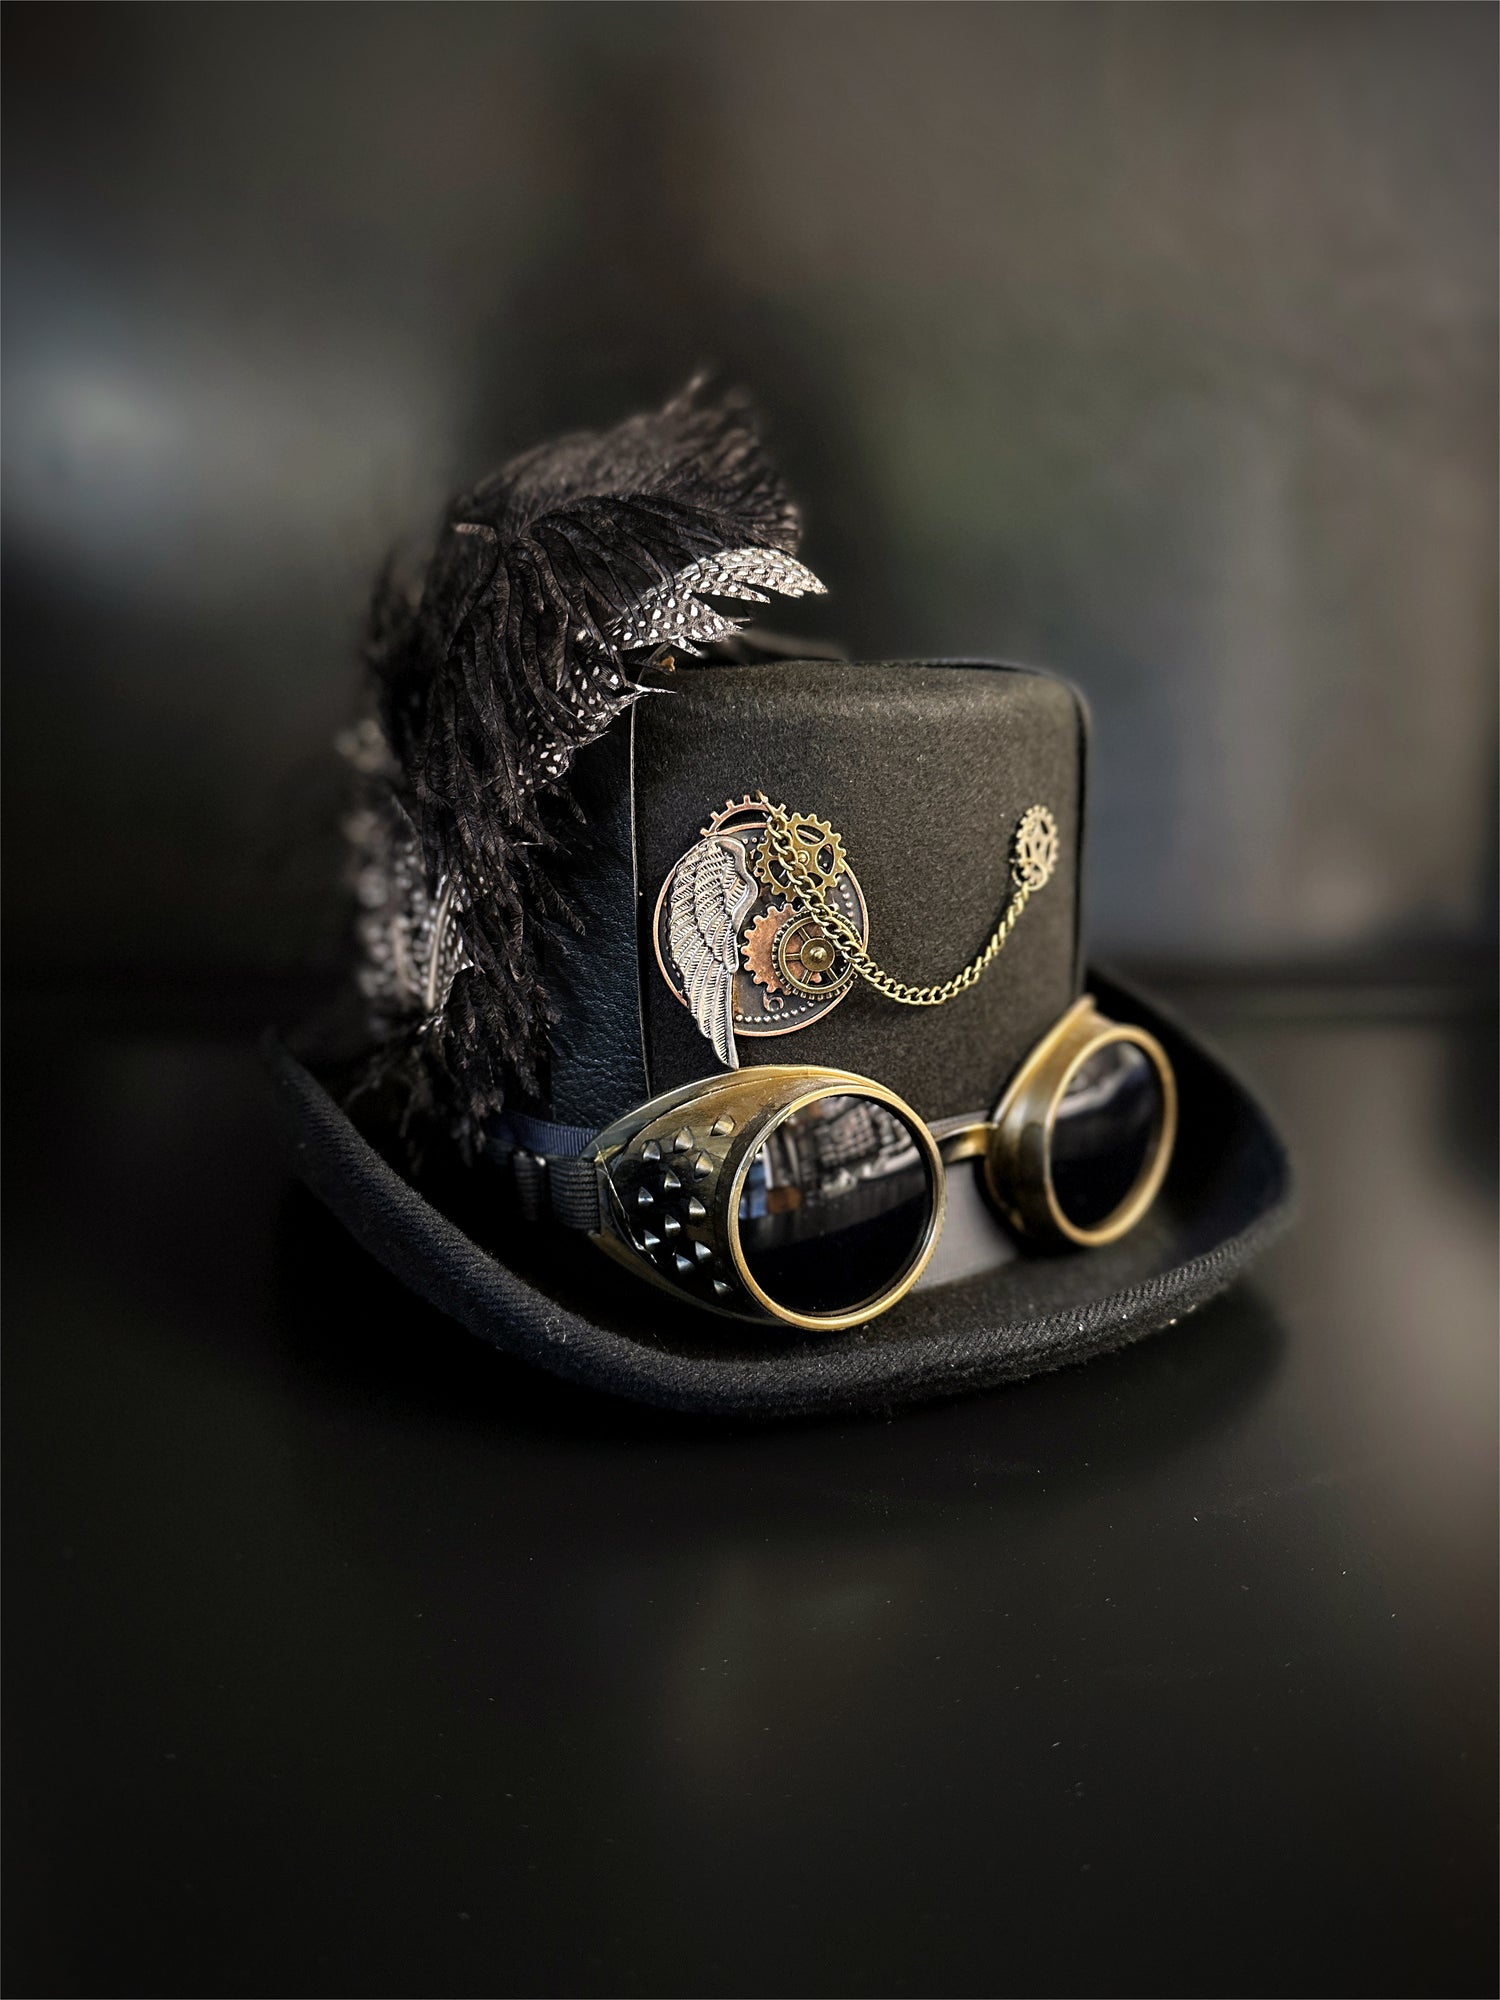 Black steampunk hat with feathers, steampunk motifs, and gold goggles.